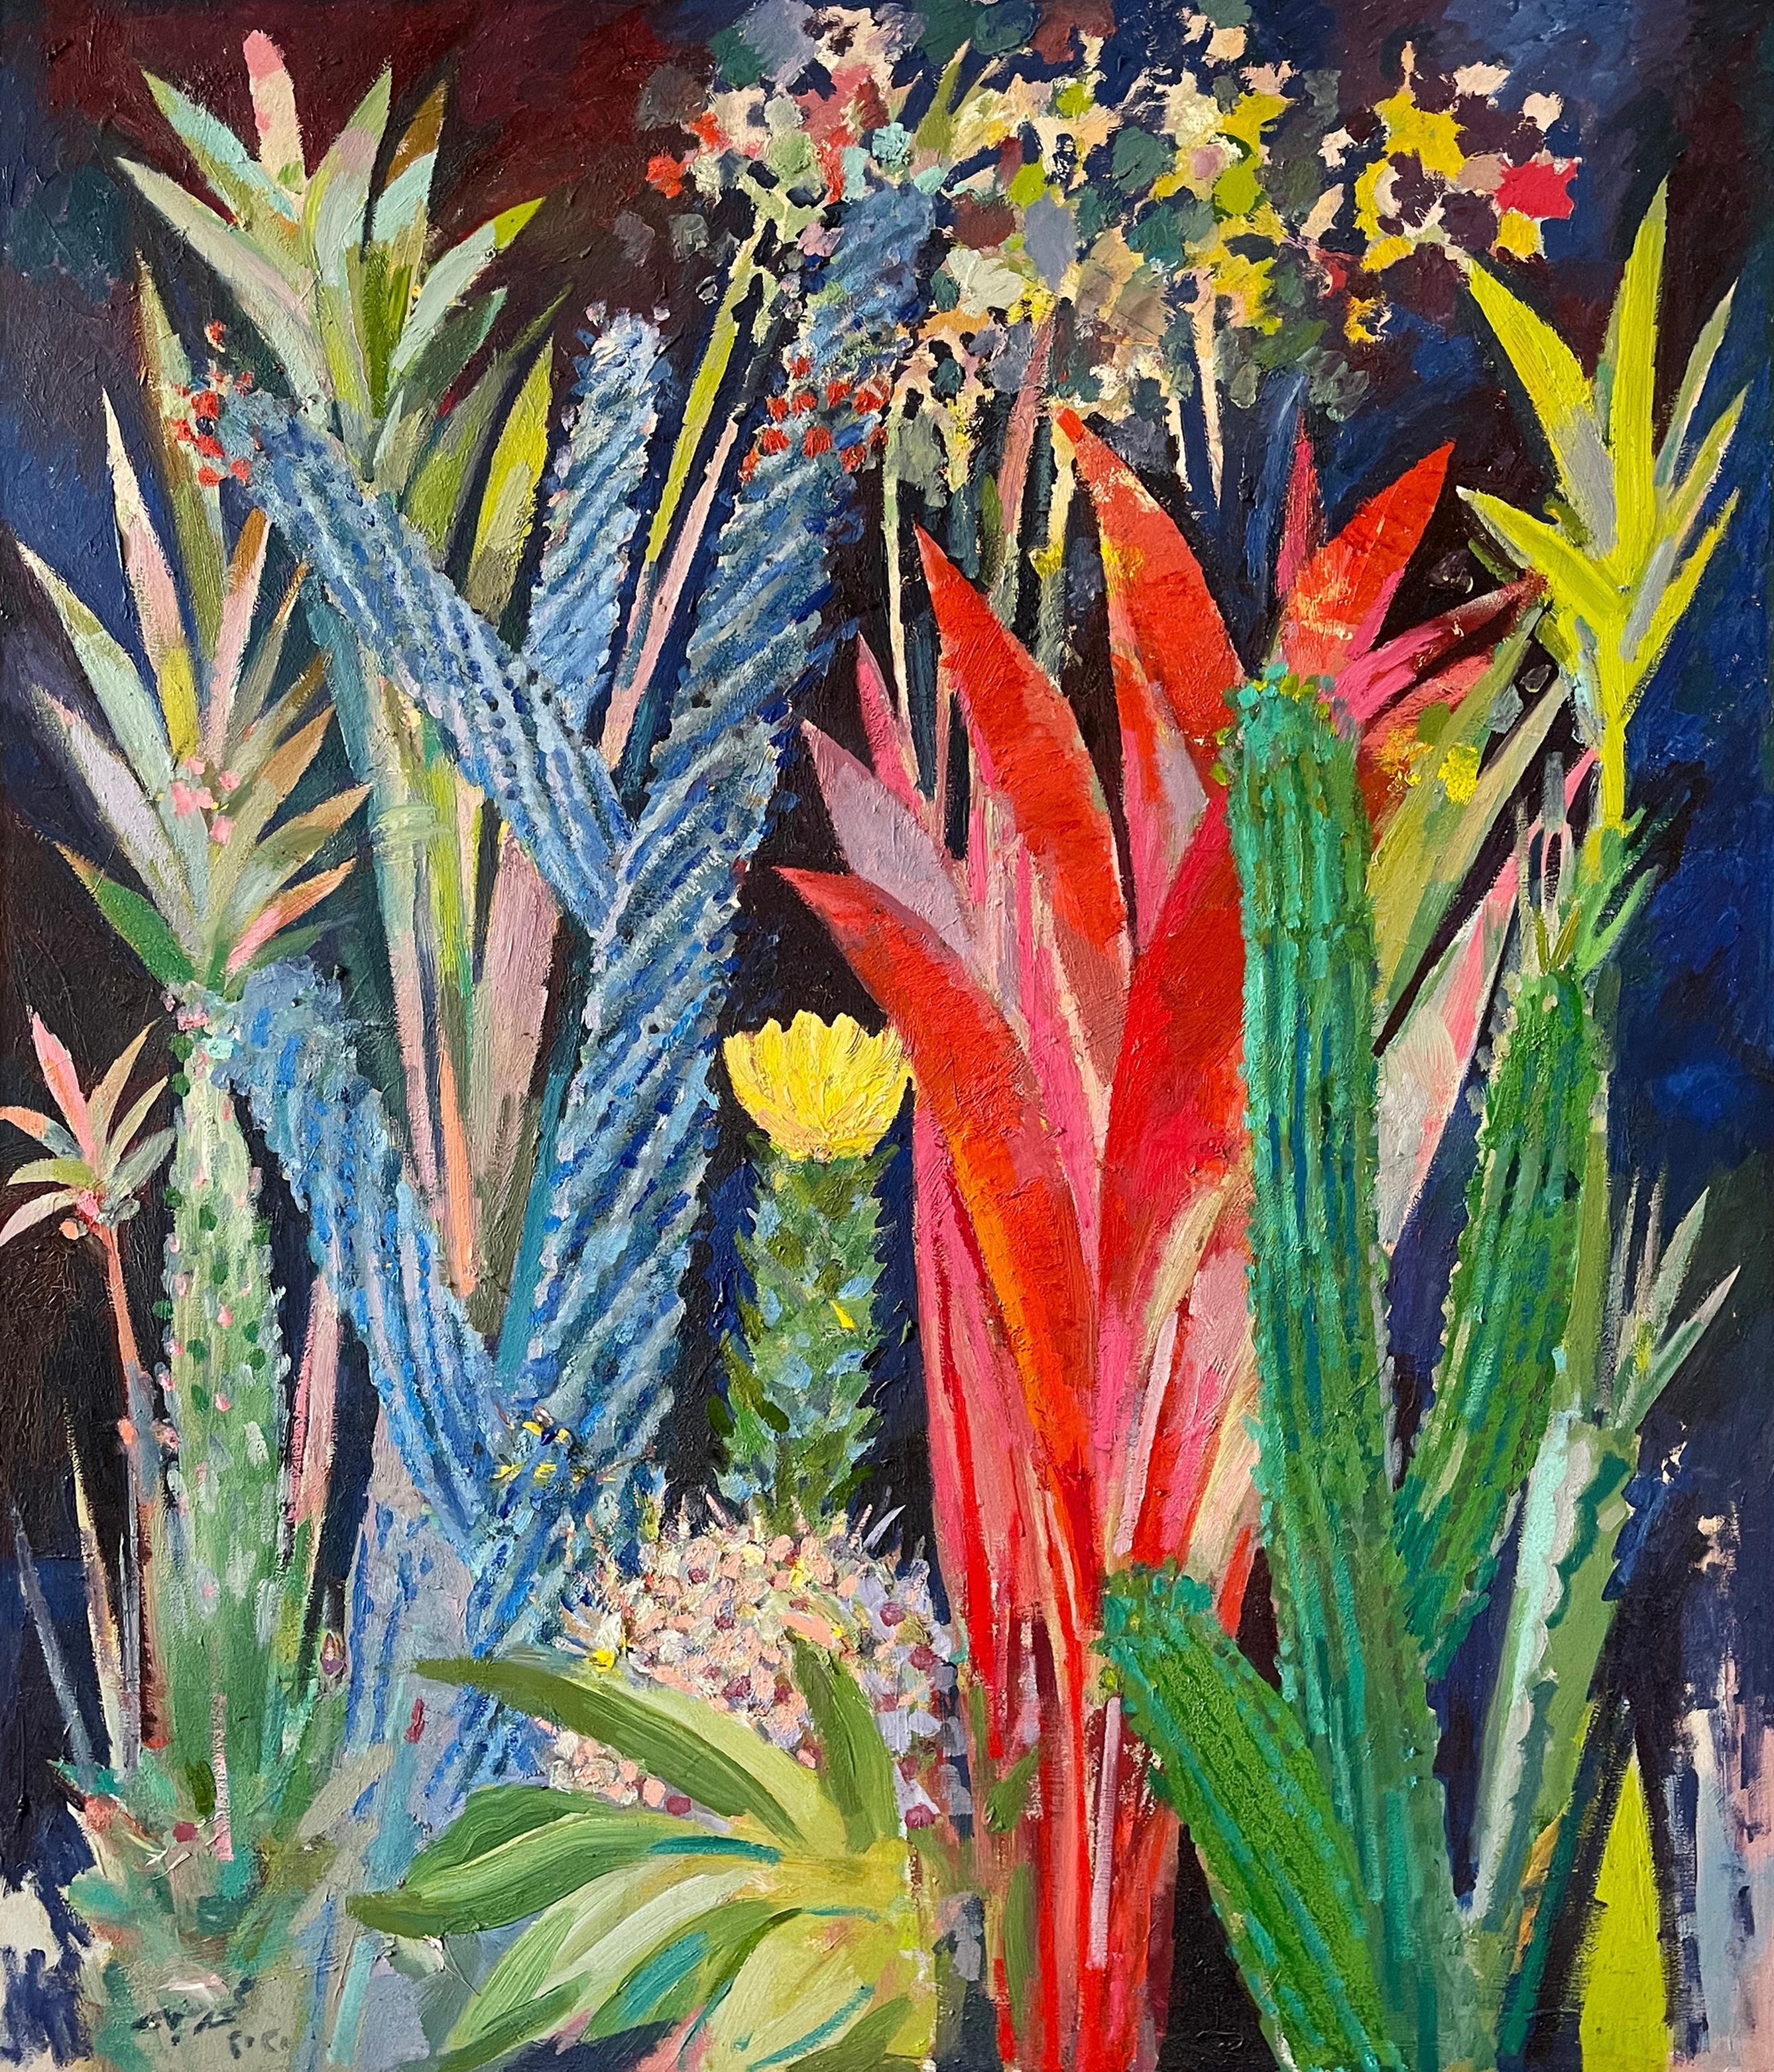 "Cactus Bouquet" Oil Painting 55" x 47" inch by Mohamed Abla

Mohamed Abla was born in Mansoura (North of Egypt) in 1953. There he spent his childhood and finished school. In 1973 he moved to Alexandria to start a five-year art study at the faculty